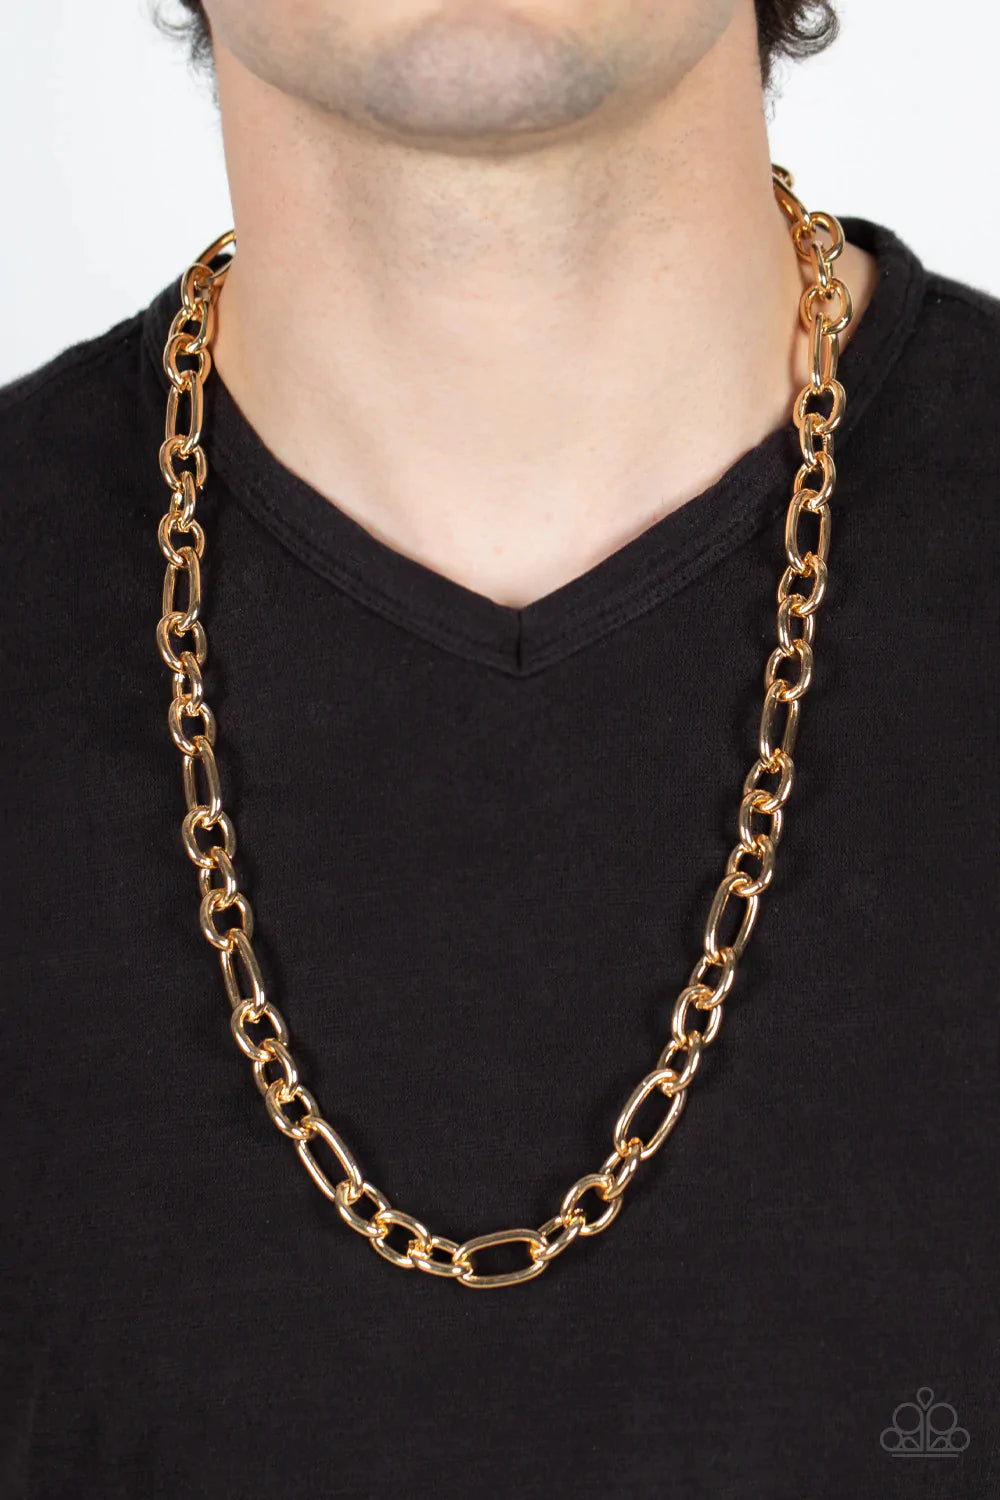 Paparazzi Accessories Ringside Throne - Gold A hefty assortment of oversized gold links boldly interlock across the chest, creating an intense urban look. Features an adjustable clasp closure. Sold as one individual necklace. Jewelry